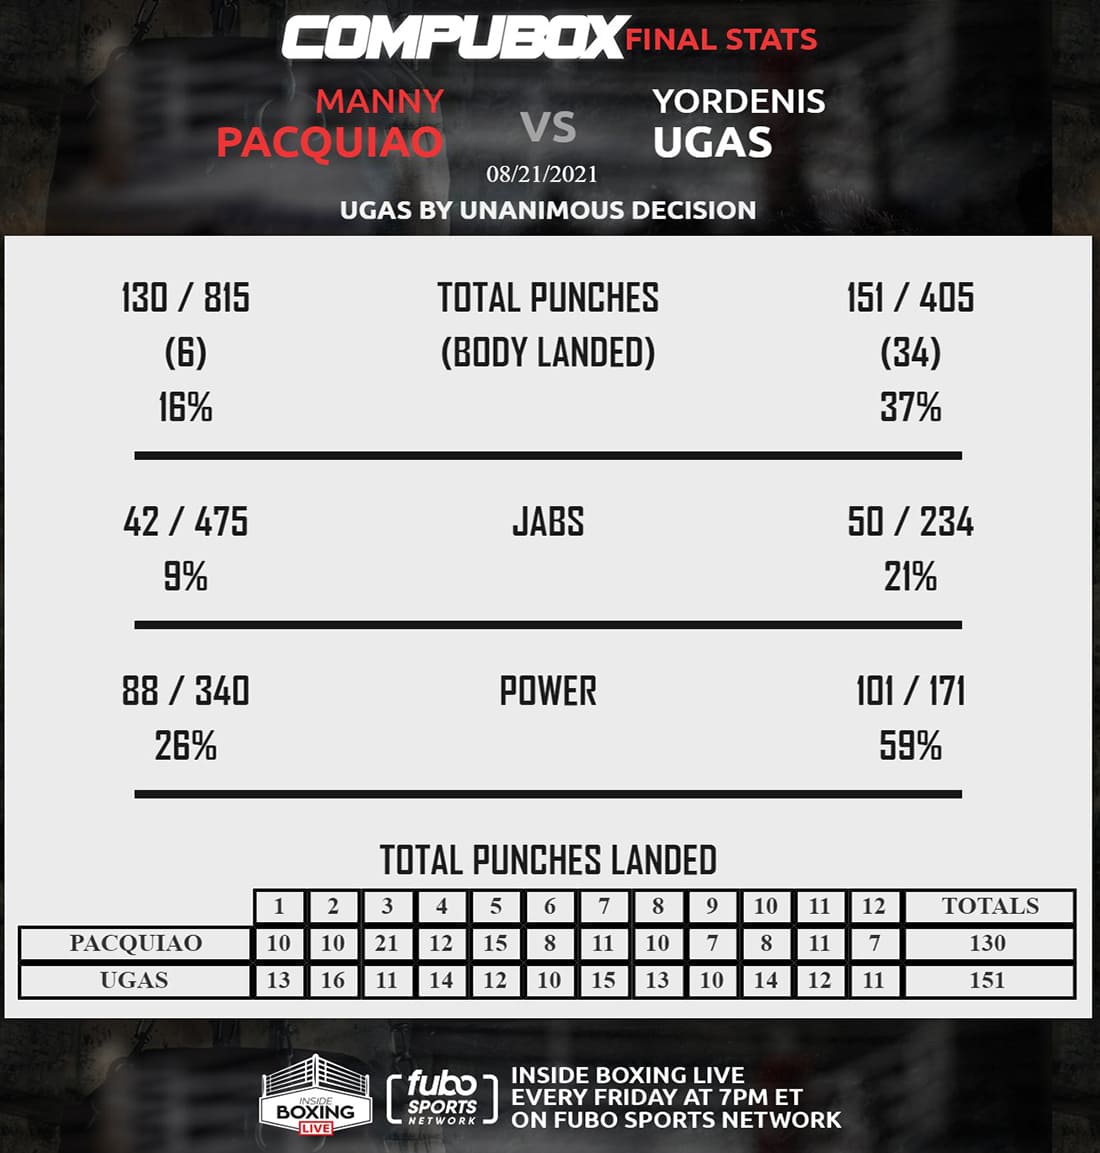 Boxing news: Manny Pacquiao vs Yordenis Ugas. Boxing Match Review